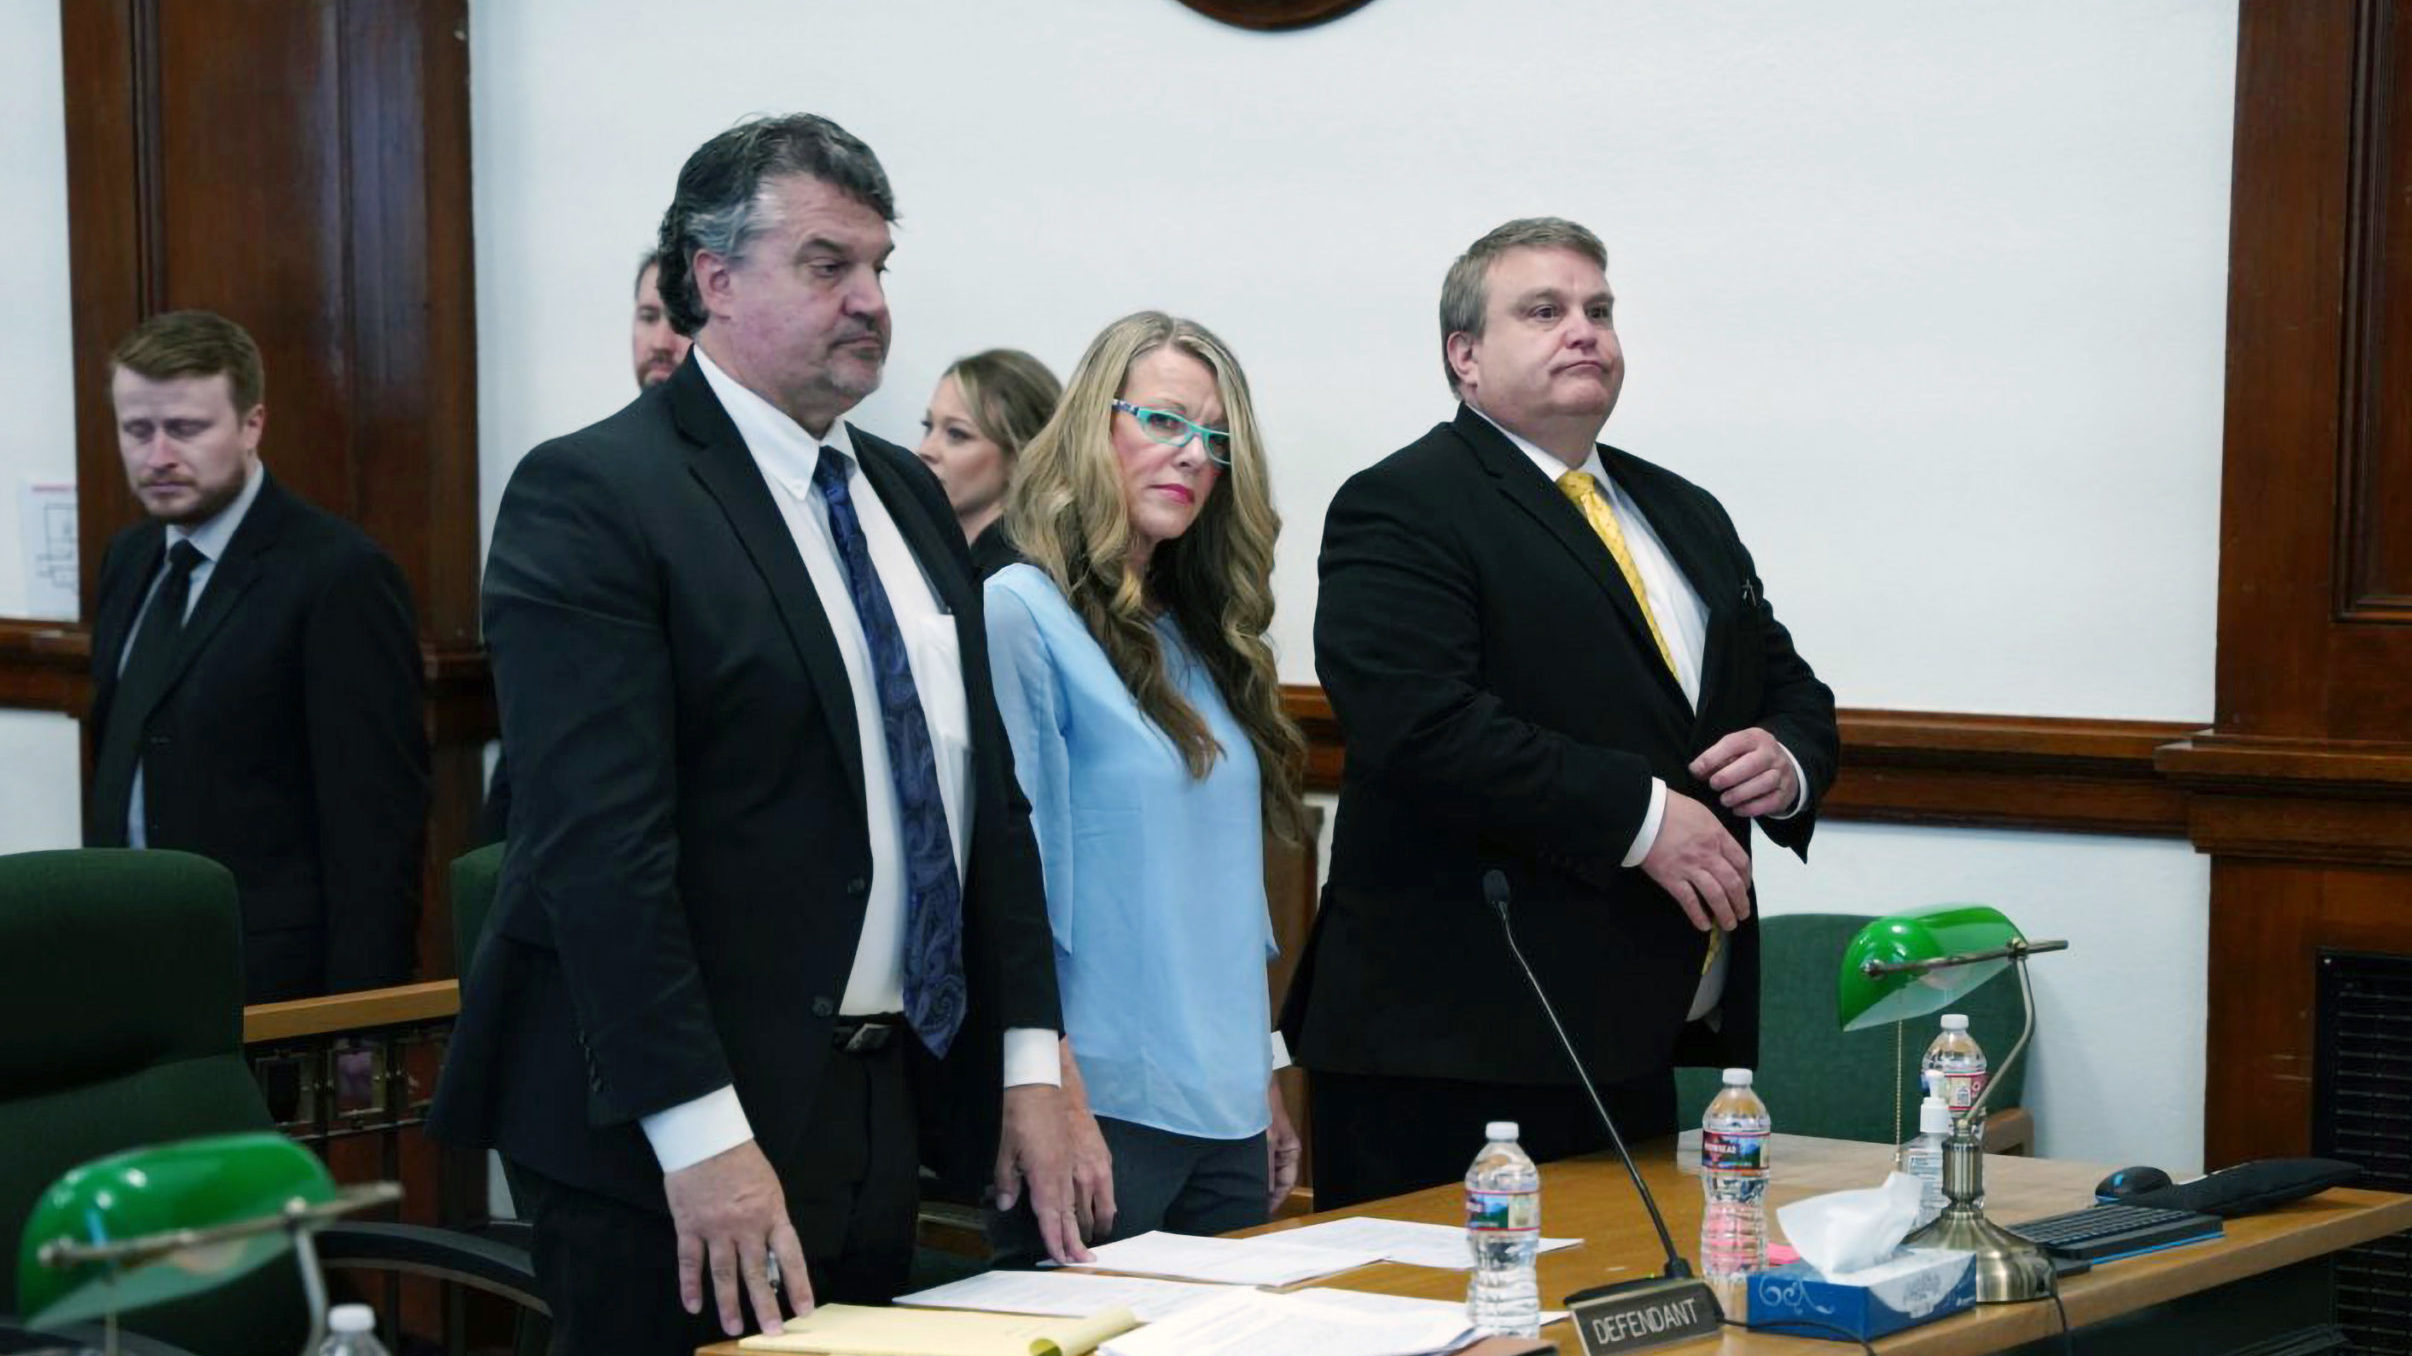 Lori Vallow Daybell, center, listens during a court hearing in St. Anthony, Idaho, Tuesday, April 1...